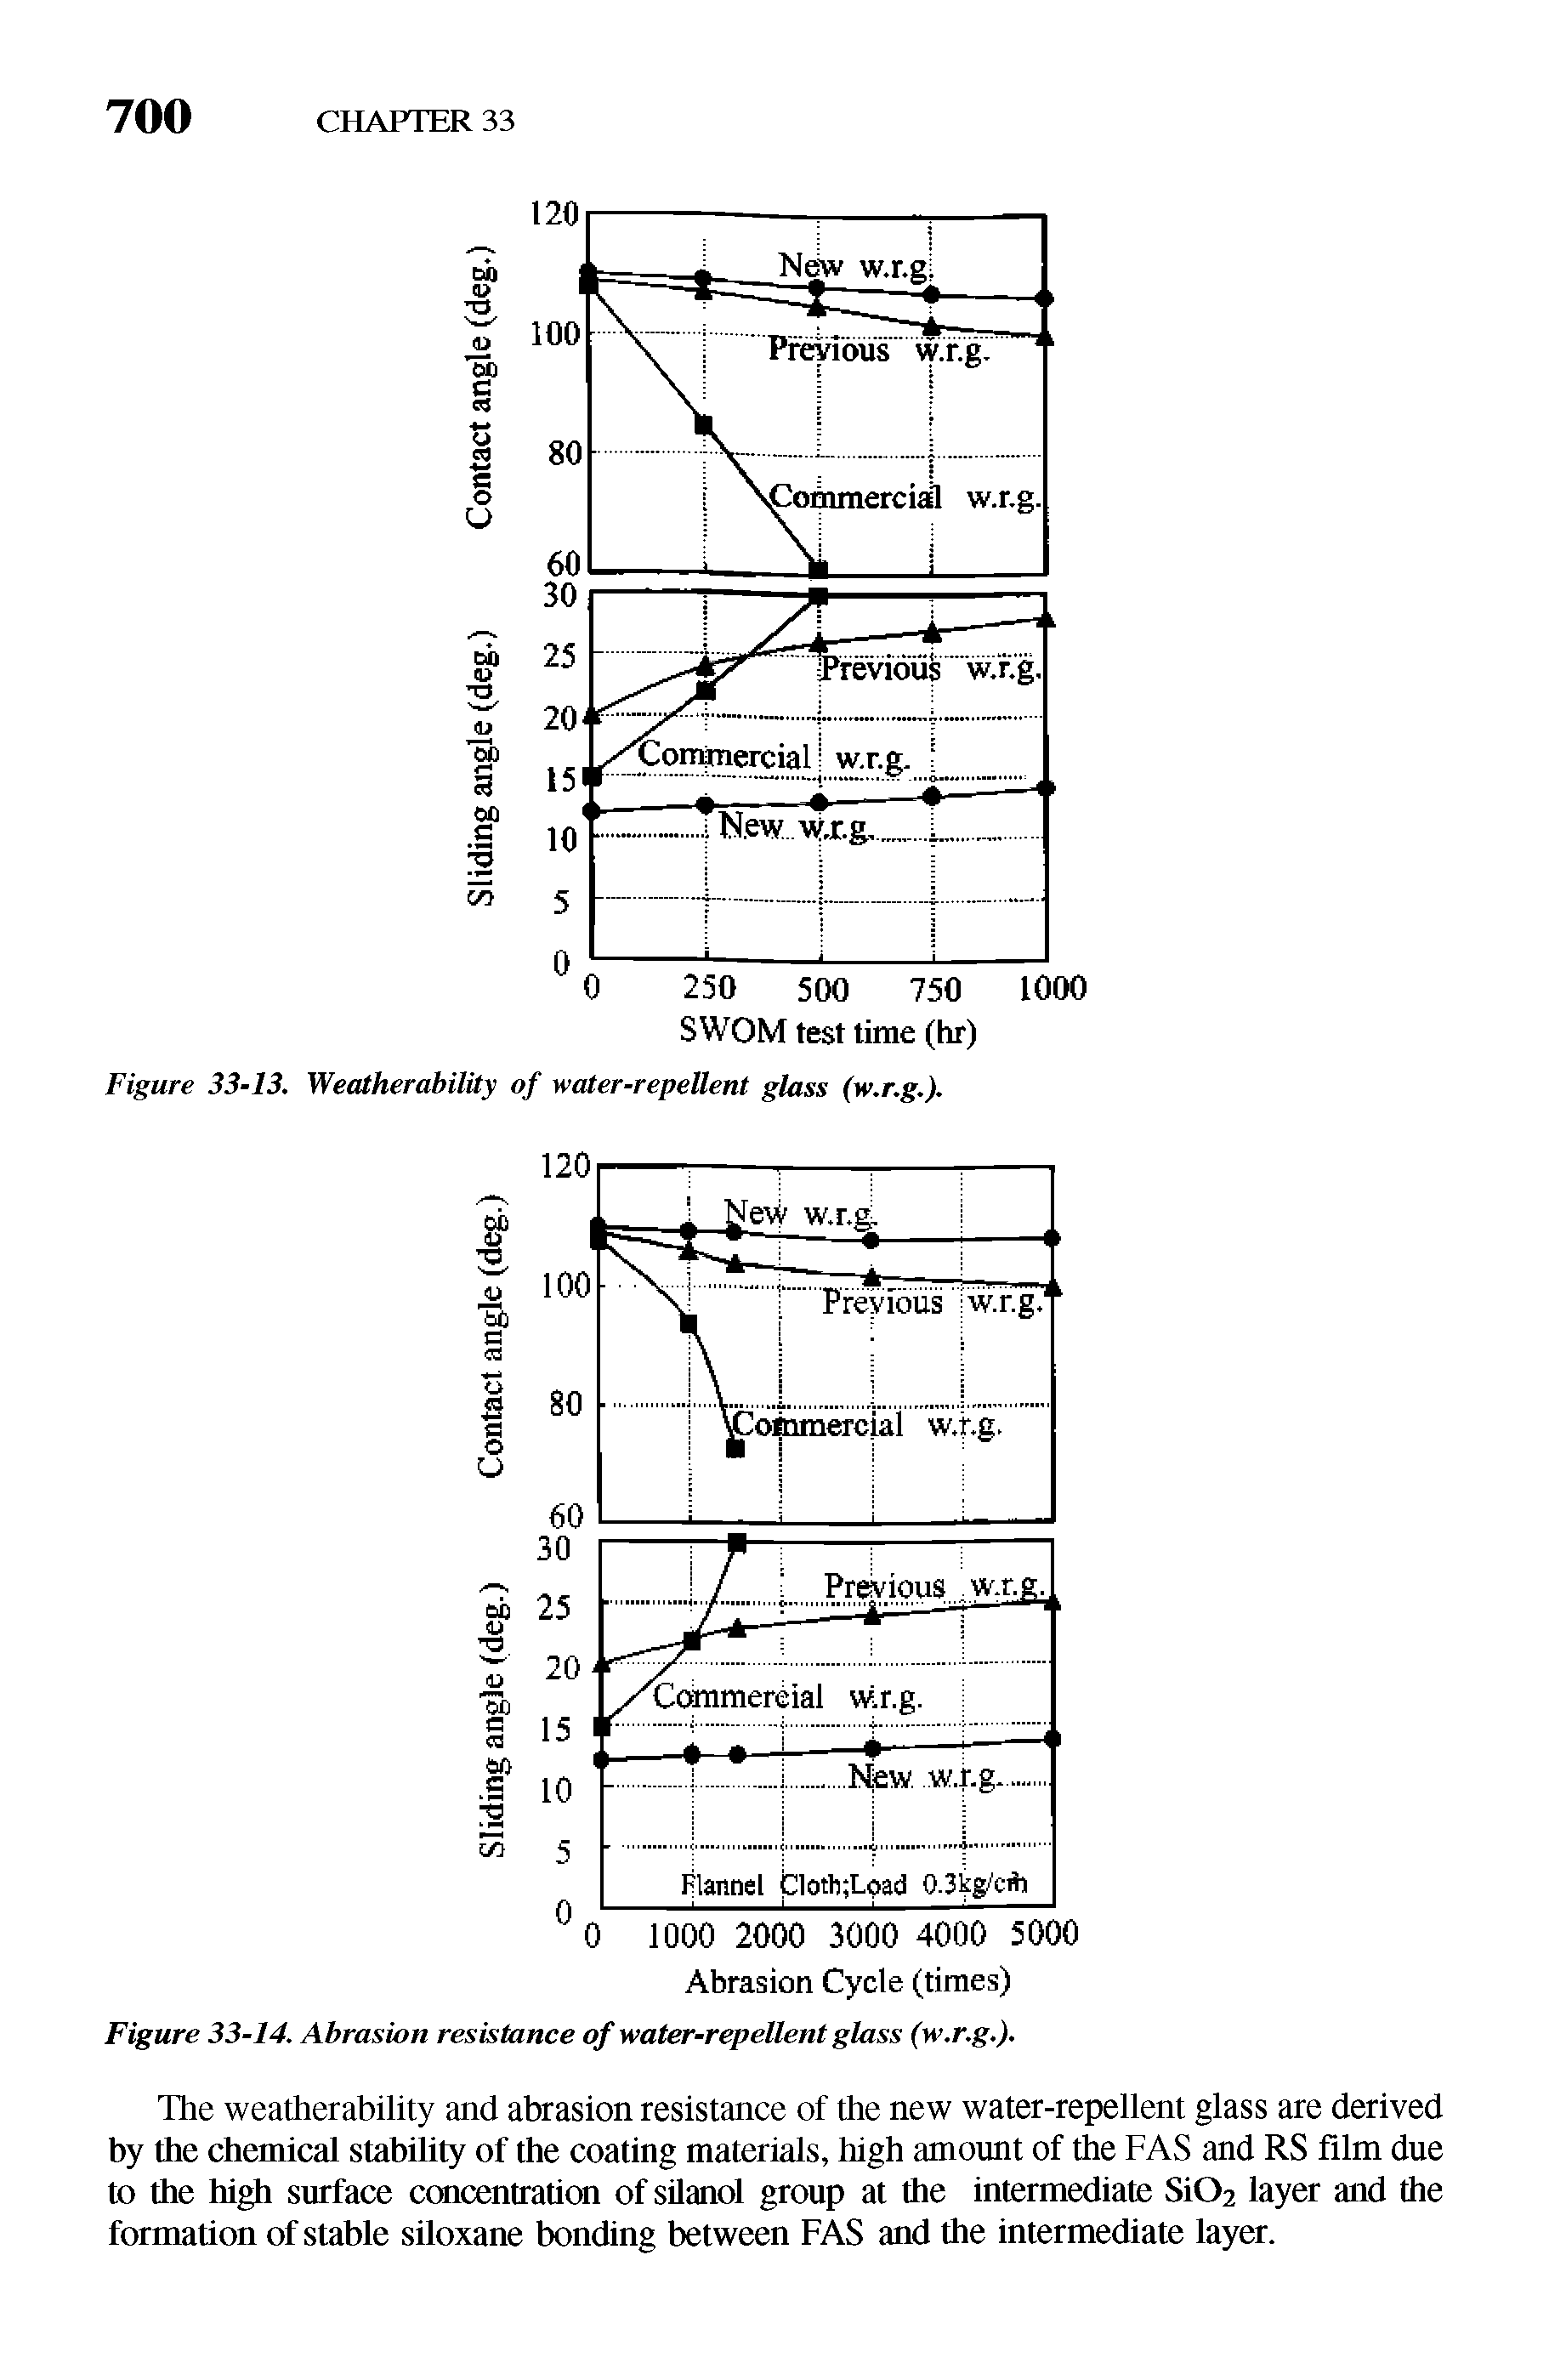 Figure 33-14. Abrasion resistance of water-repellent glass (w.r.g.).